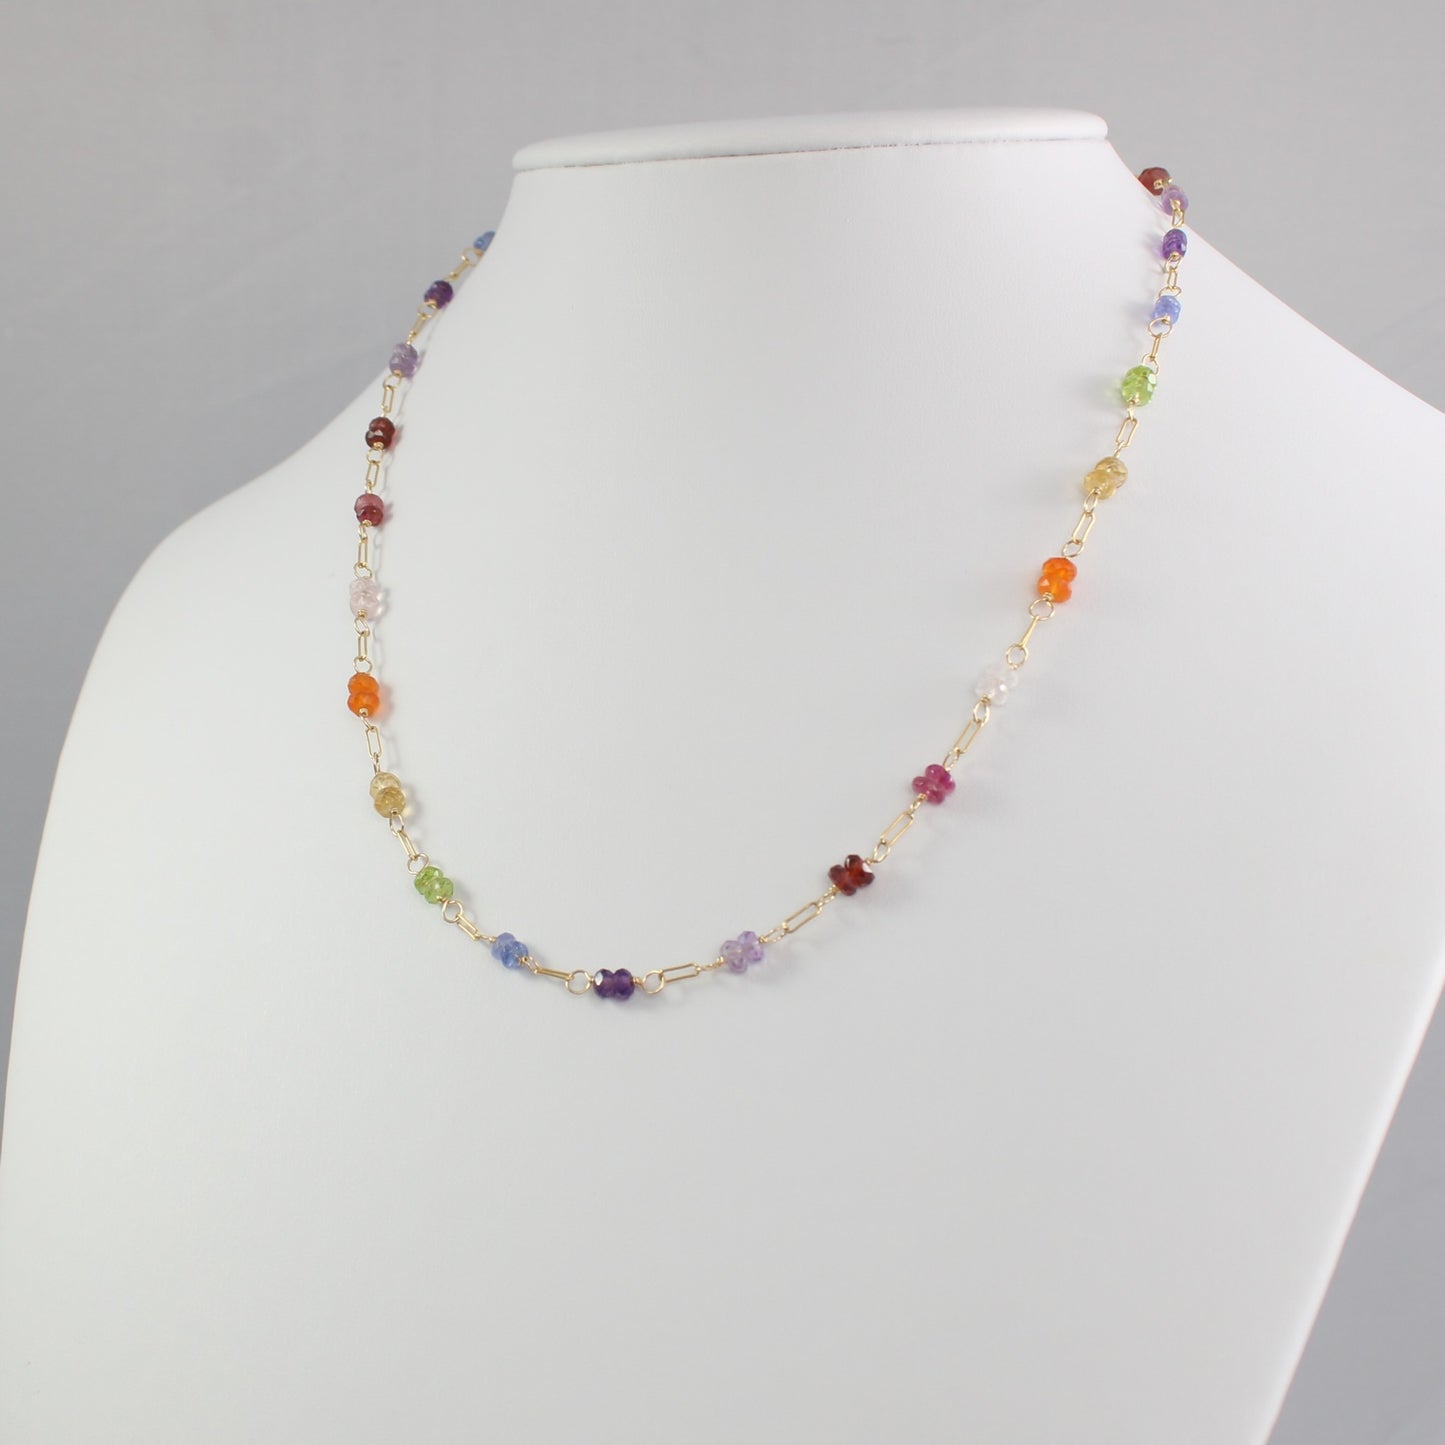 Rainbow Multi Gemstone Necklace with Paperclip Chain Link - Rhea